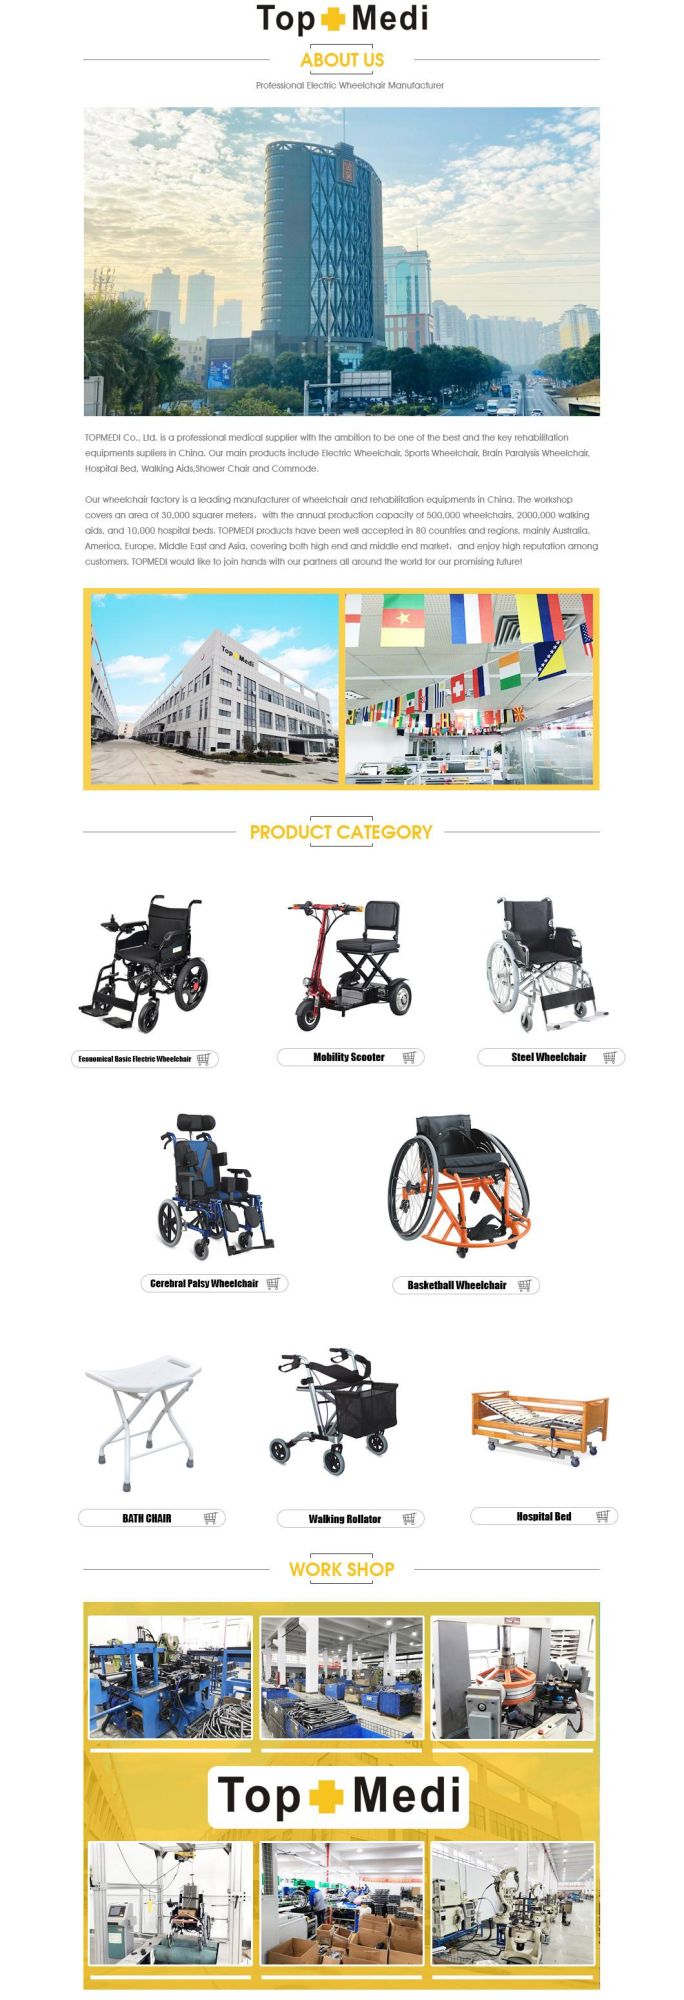 Quality Guarantee Aluminum Manual Wheelchair for Older People